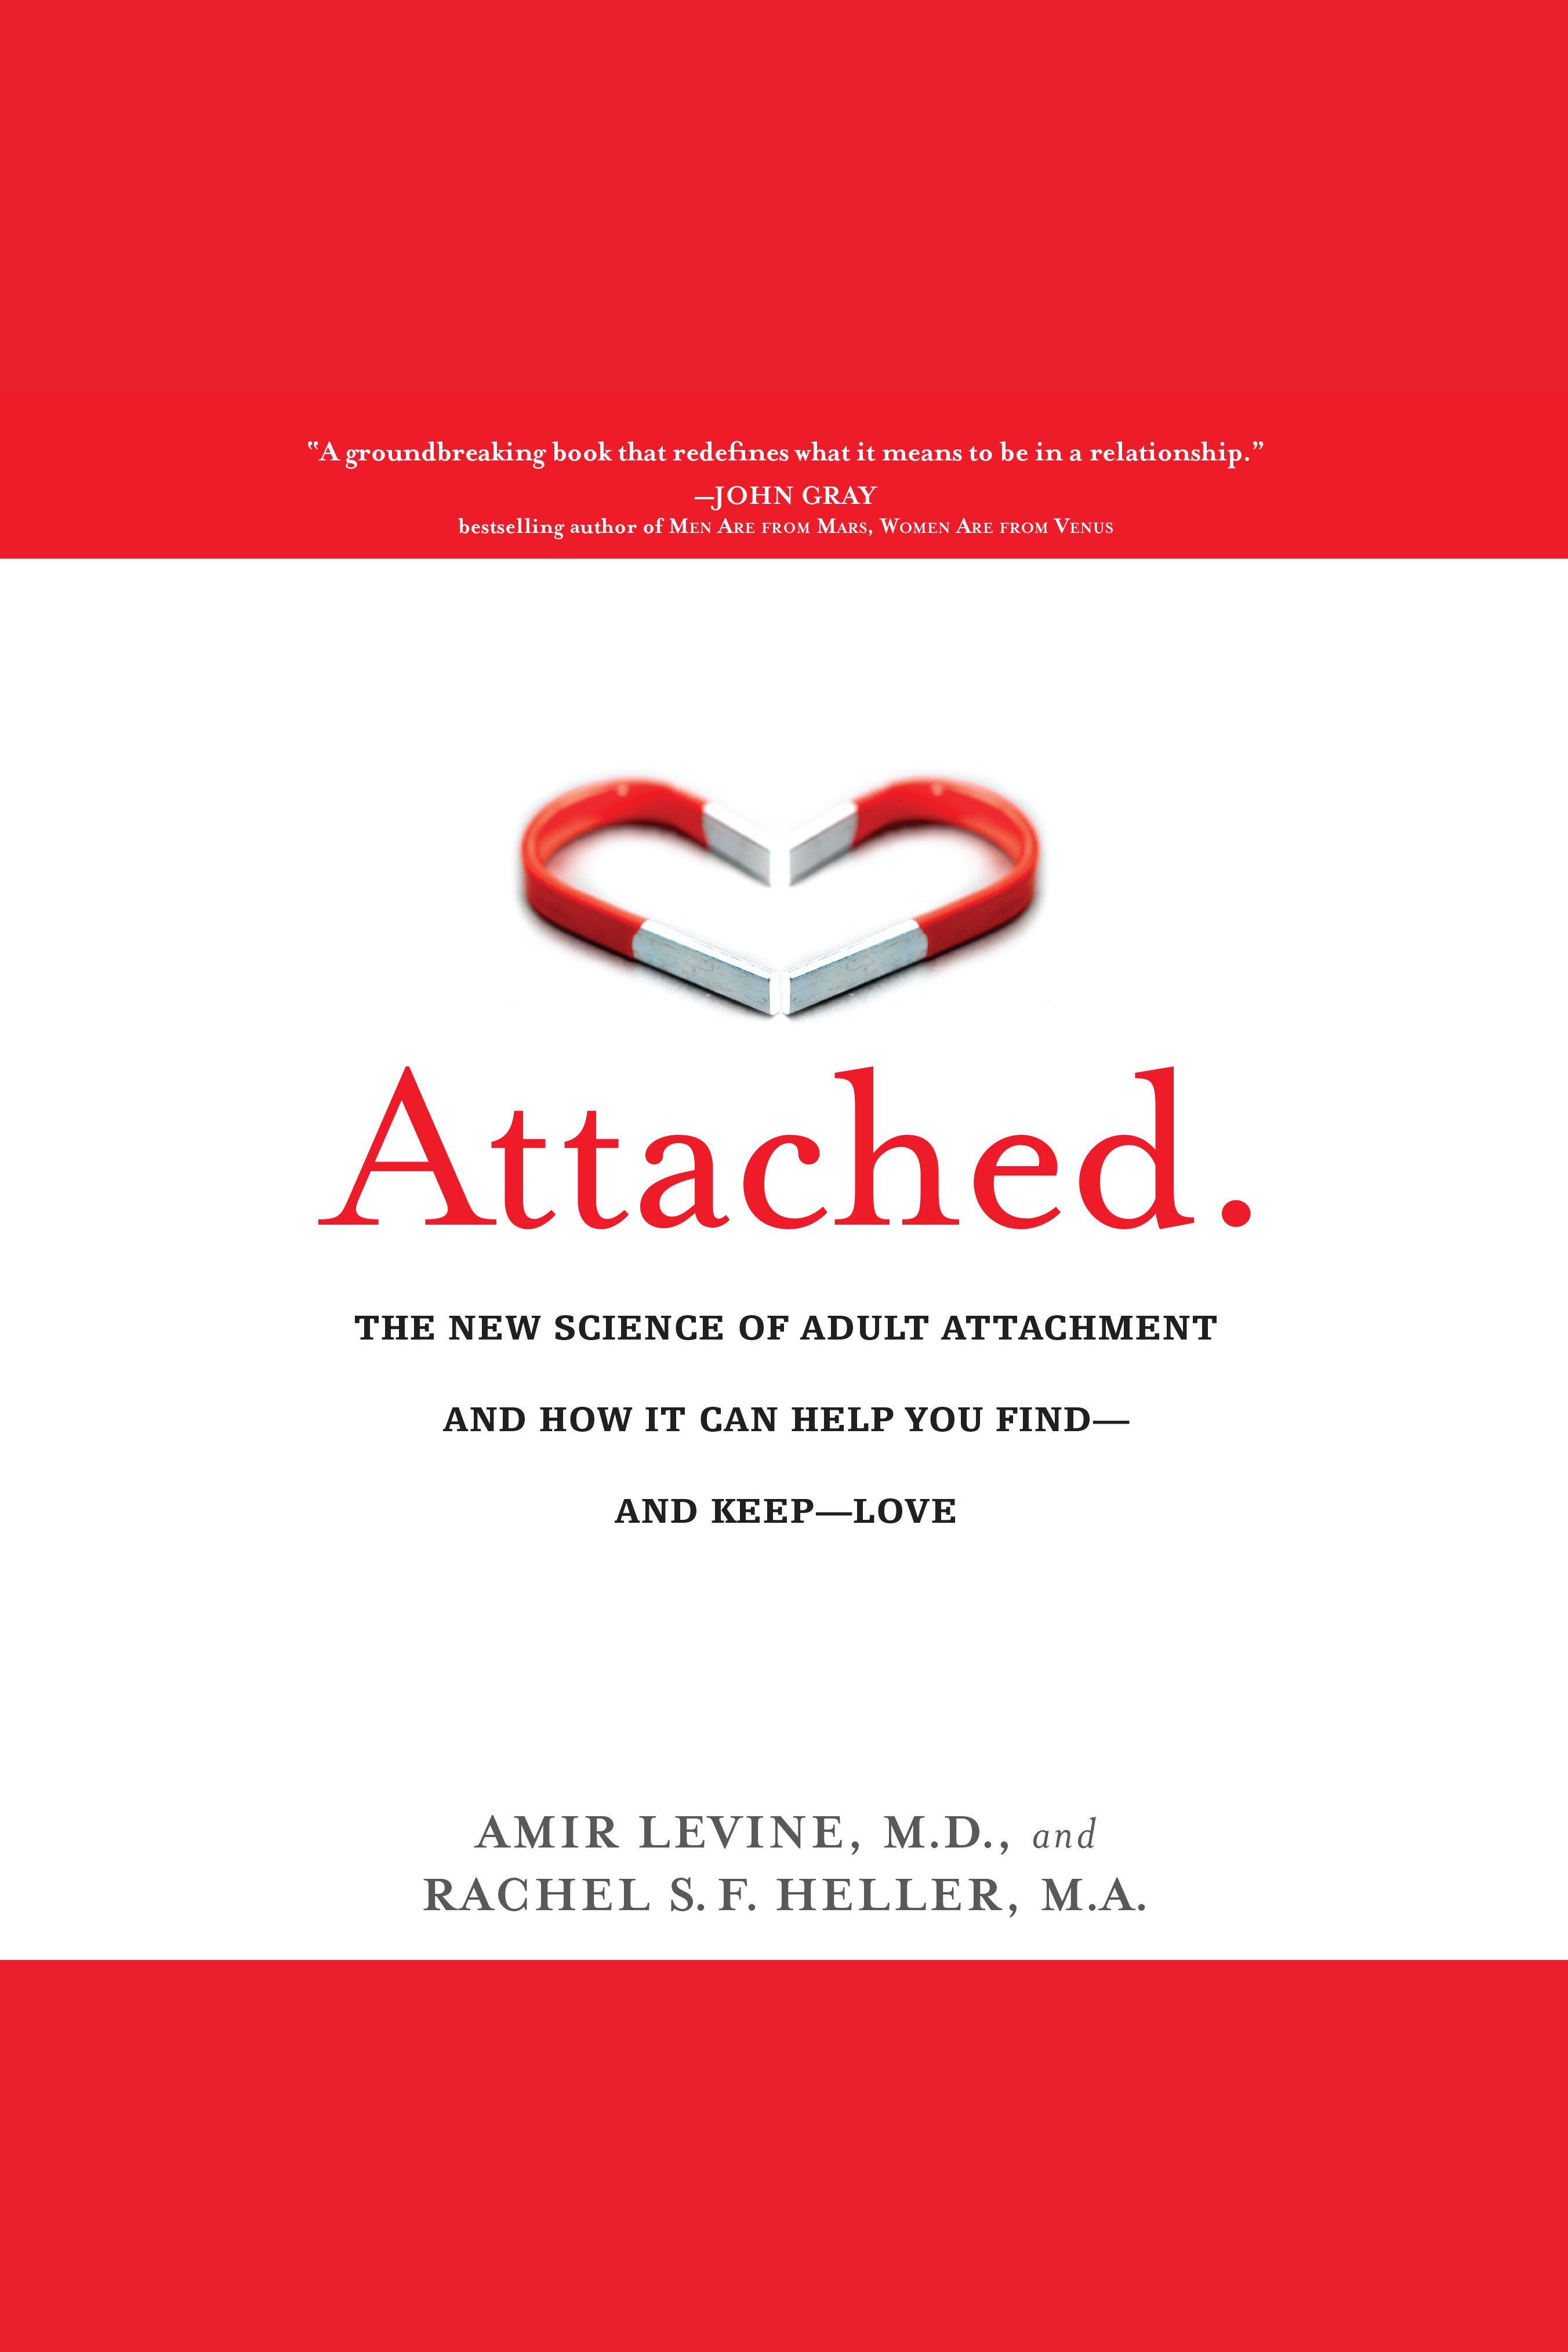 Attached The New Science of Adult Attachment and How It Can Help You find--and keep--love cover image